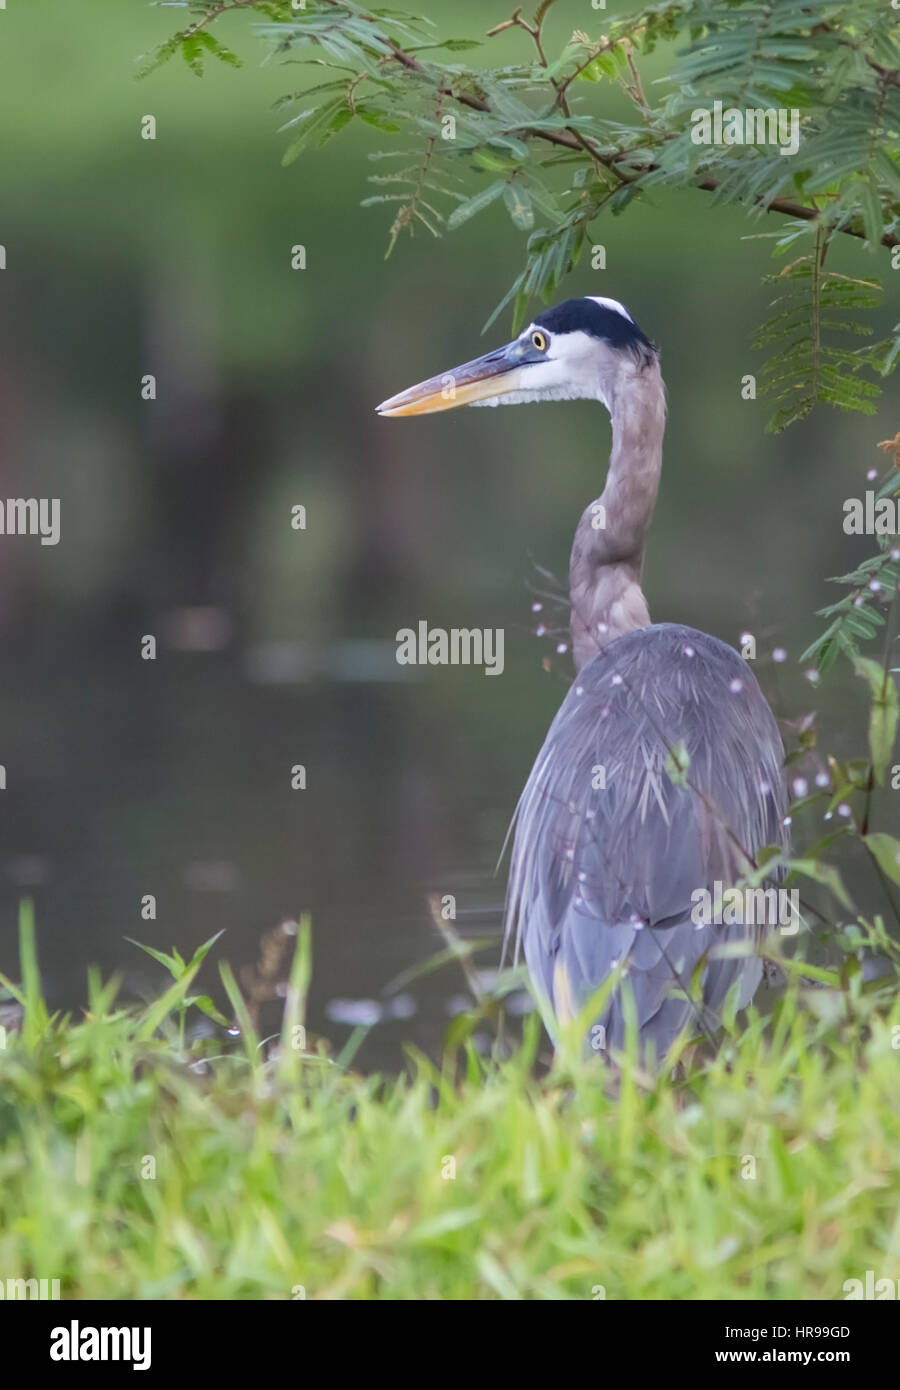 Great Blue Heron at the side of a lake Stock Photo